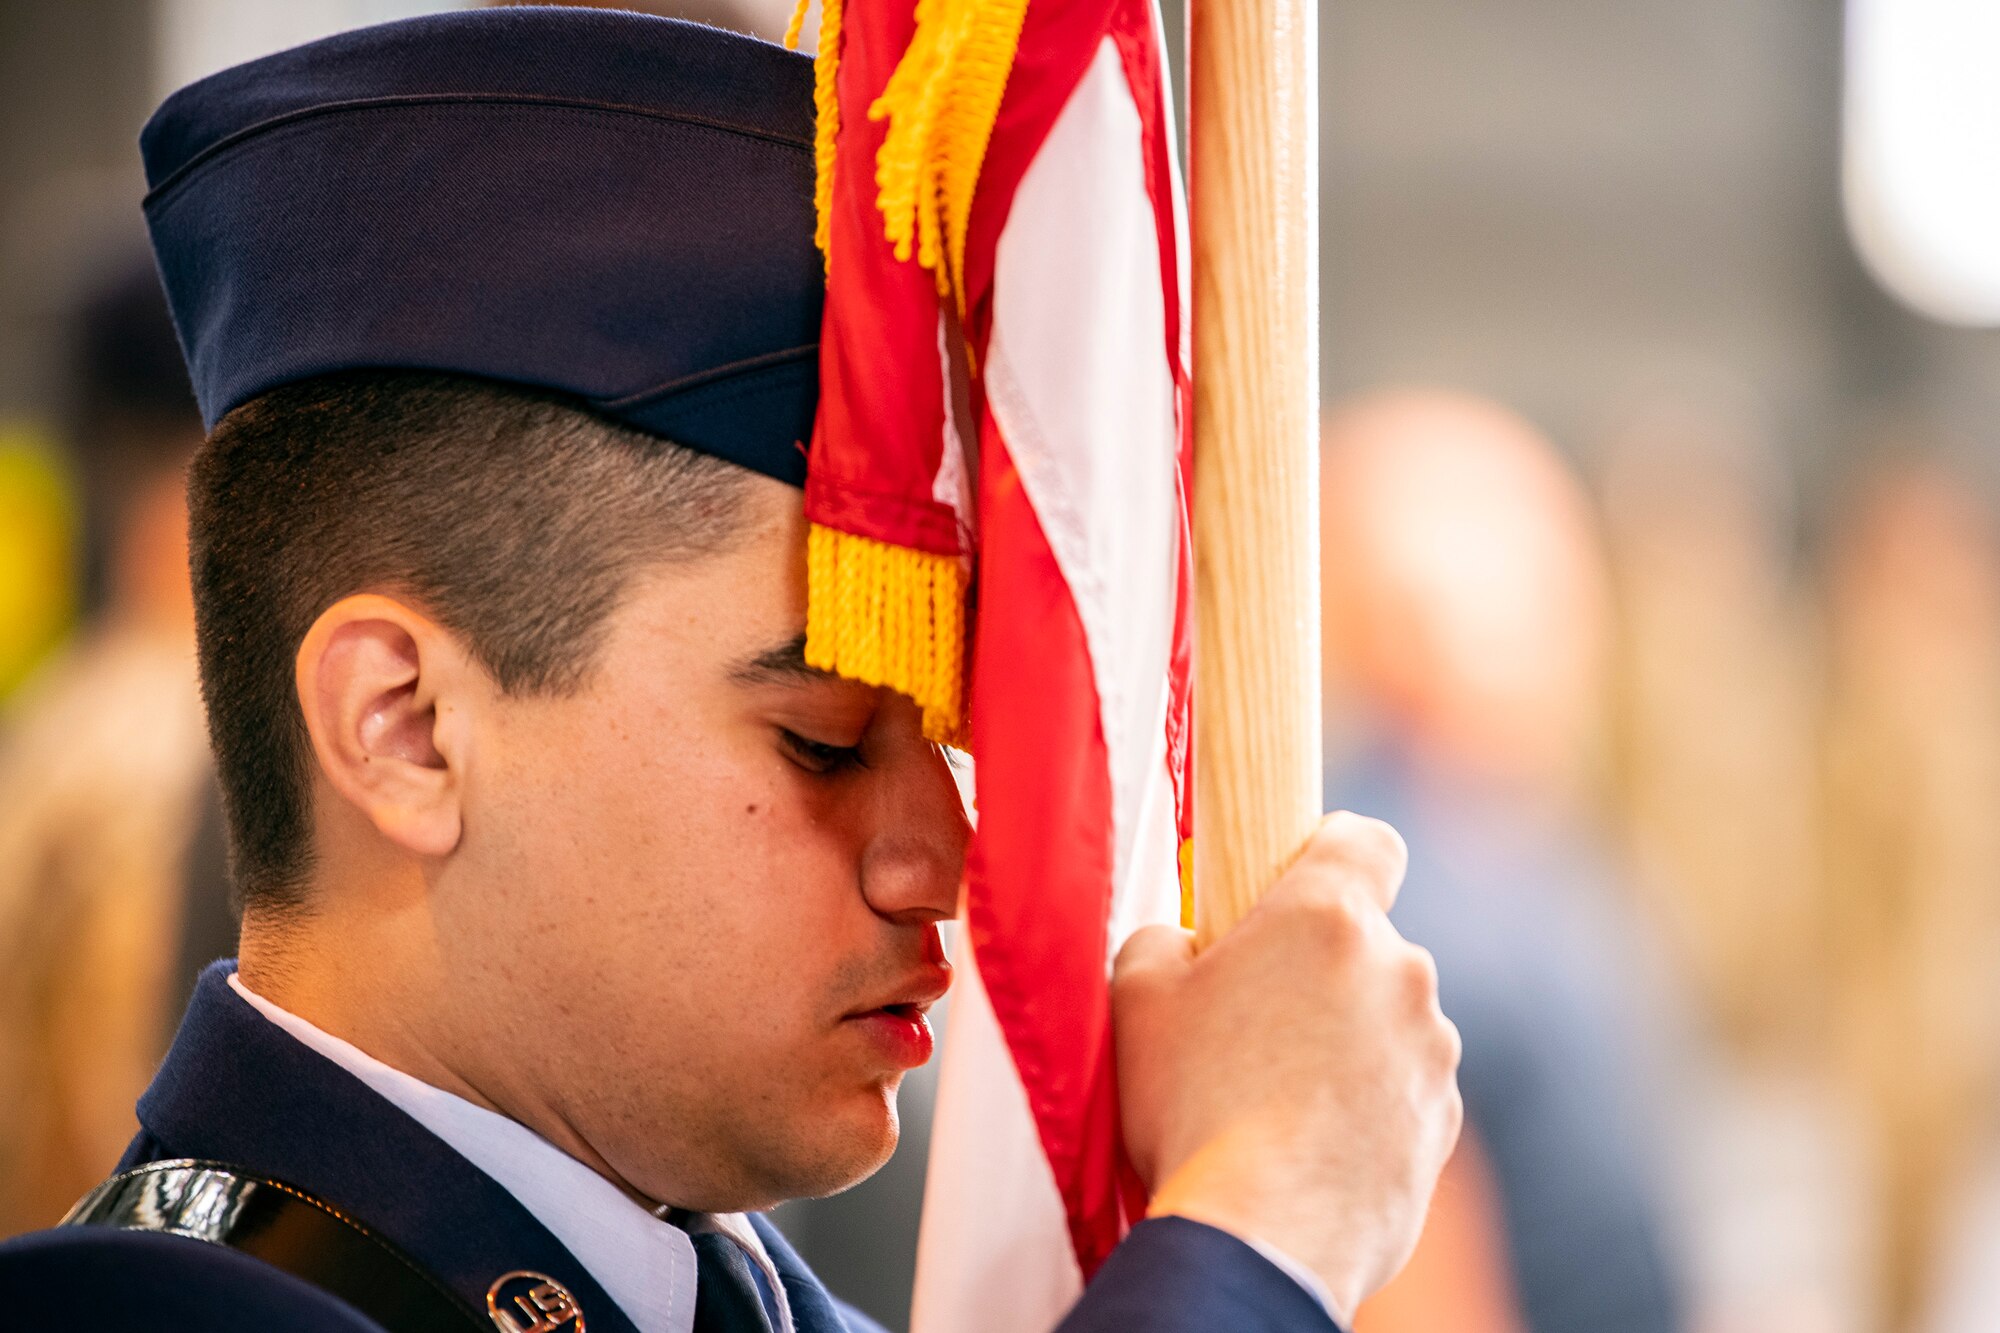 U.S. Air Force Airman Francisco Ruiz, 423d Communications Squadron client systems apprentice, holds a United States Flag during a change of command ceremony at RAF Alconbury, England, July 25, 2022. The ceremony is a military tradition that represents a formal transfer of a unit’s authority from one commander to another. (U.S. Air Force photo by Staff Sgt. Eugene Oliver)